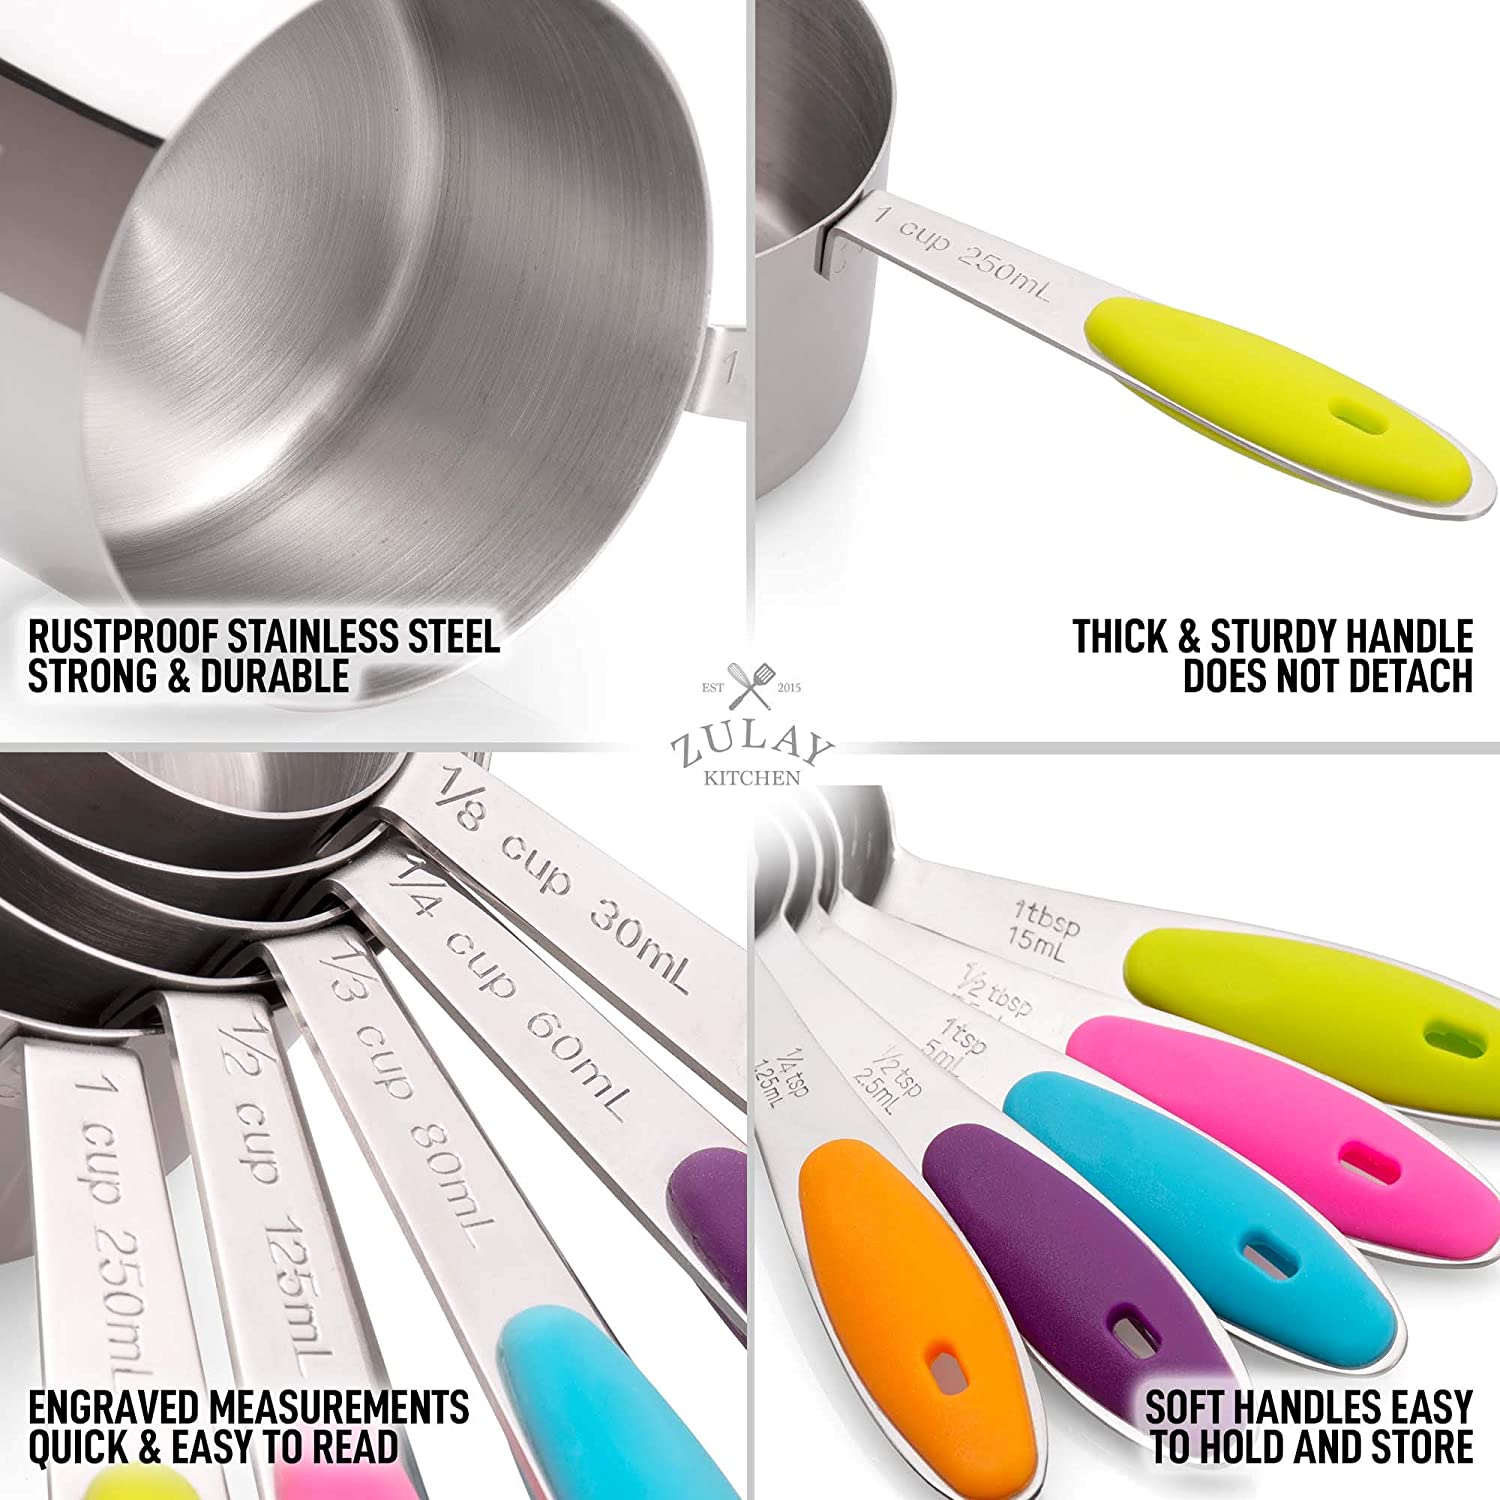 Measuring Cups and Spoon (Multicolored) - 10 piece Set - Zulay KitchenZulay Kitchen